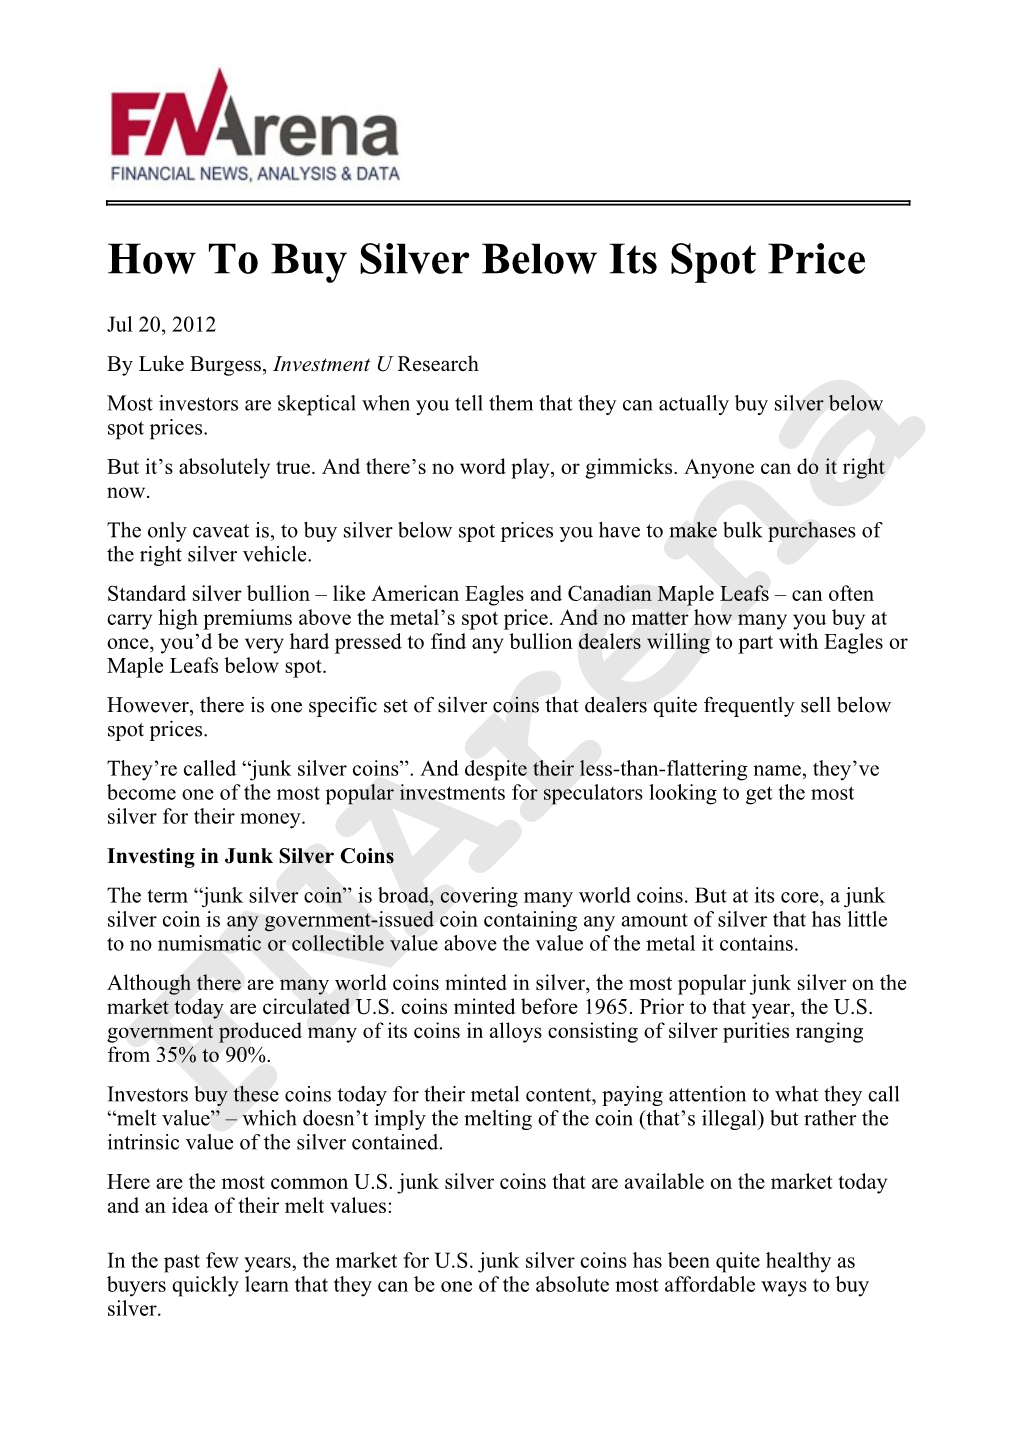 How to Buy Silver Below Its Spot Price